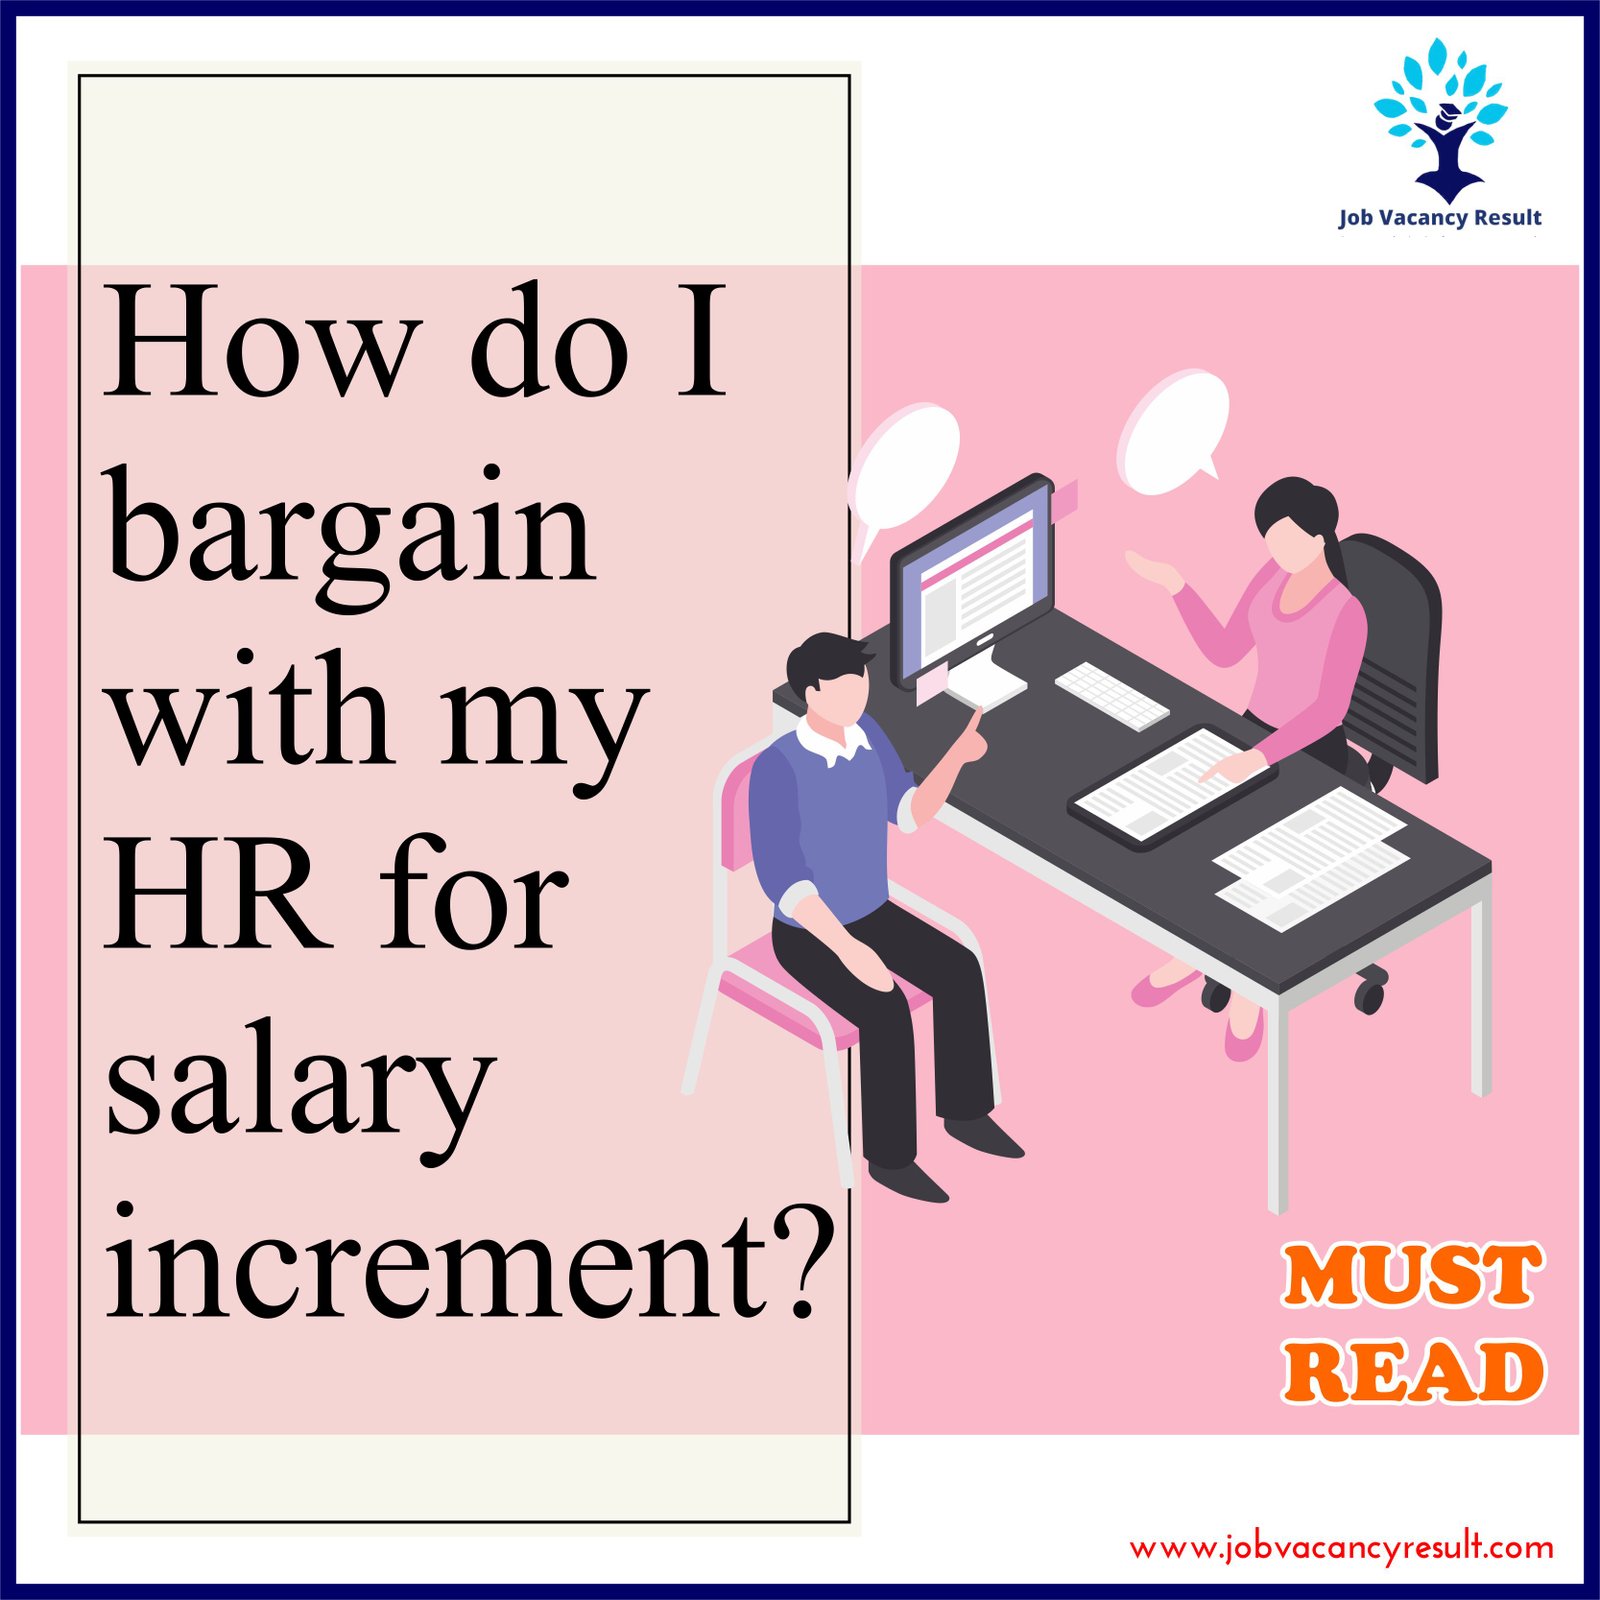 How do I bargain with my HR for salary increment?